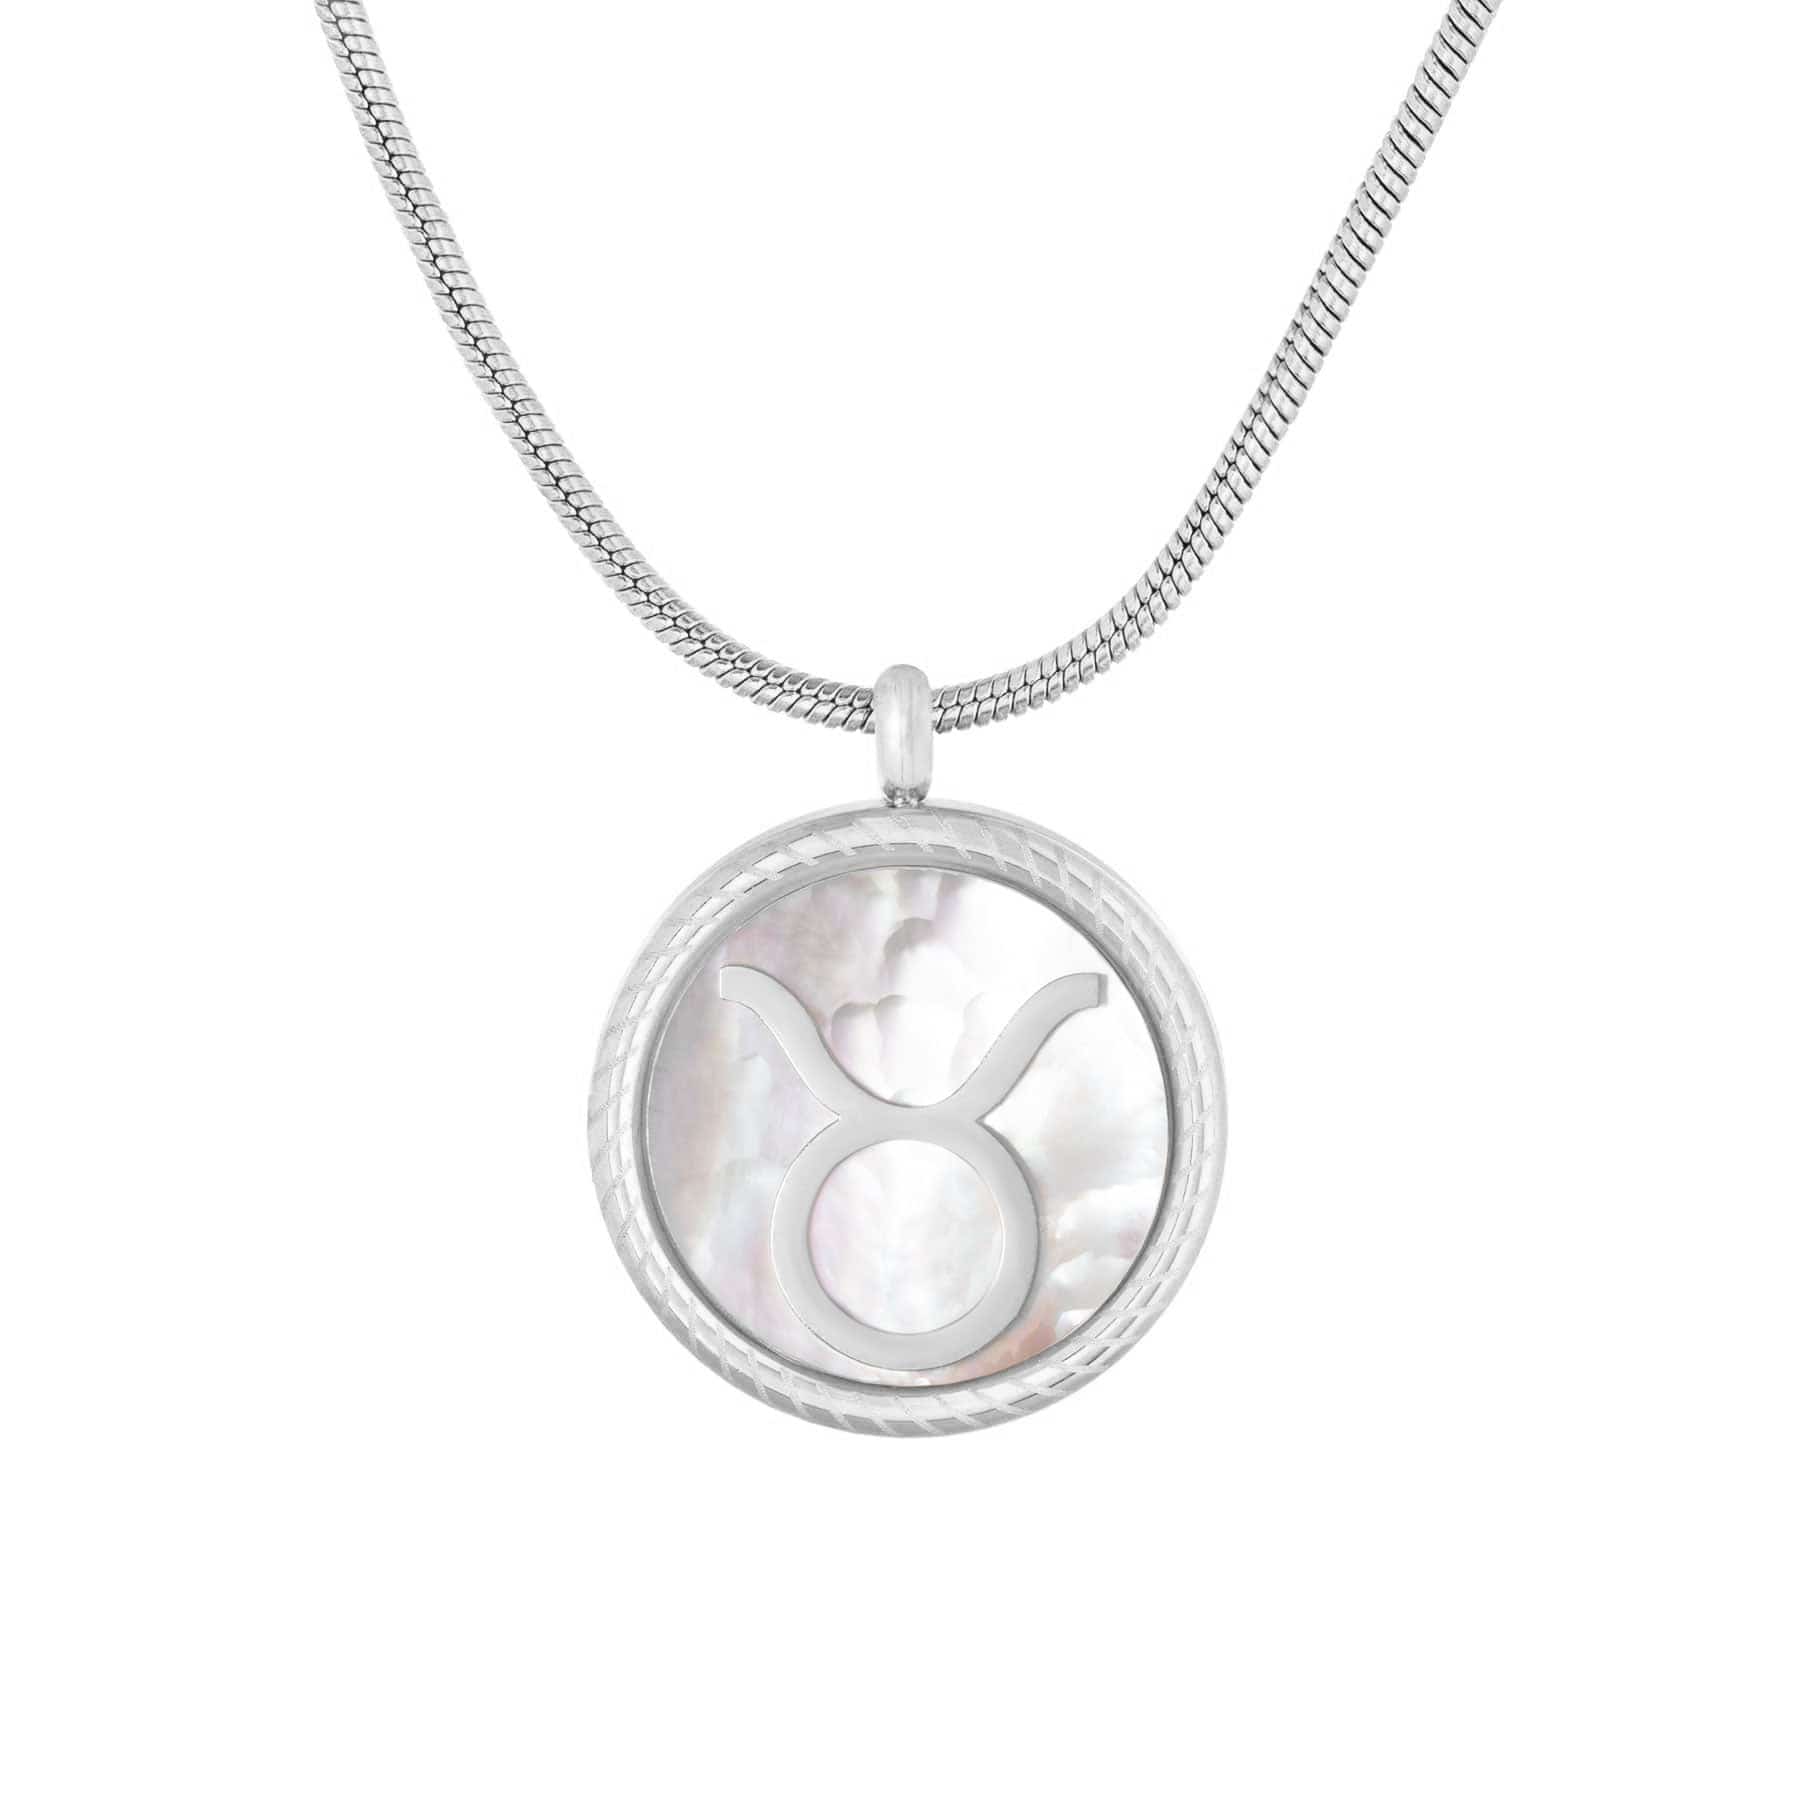 BohoMoon Stainless Steel Frost Zodiac Necklace Silver / Taurus